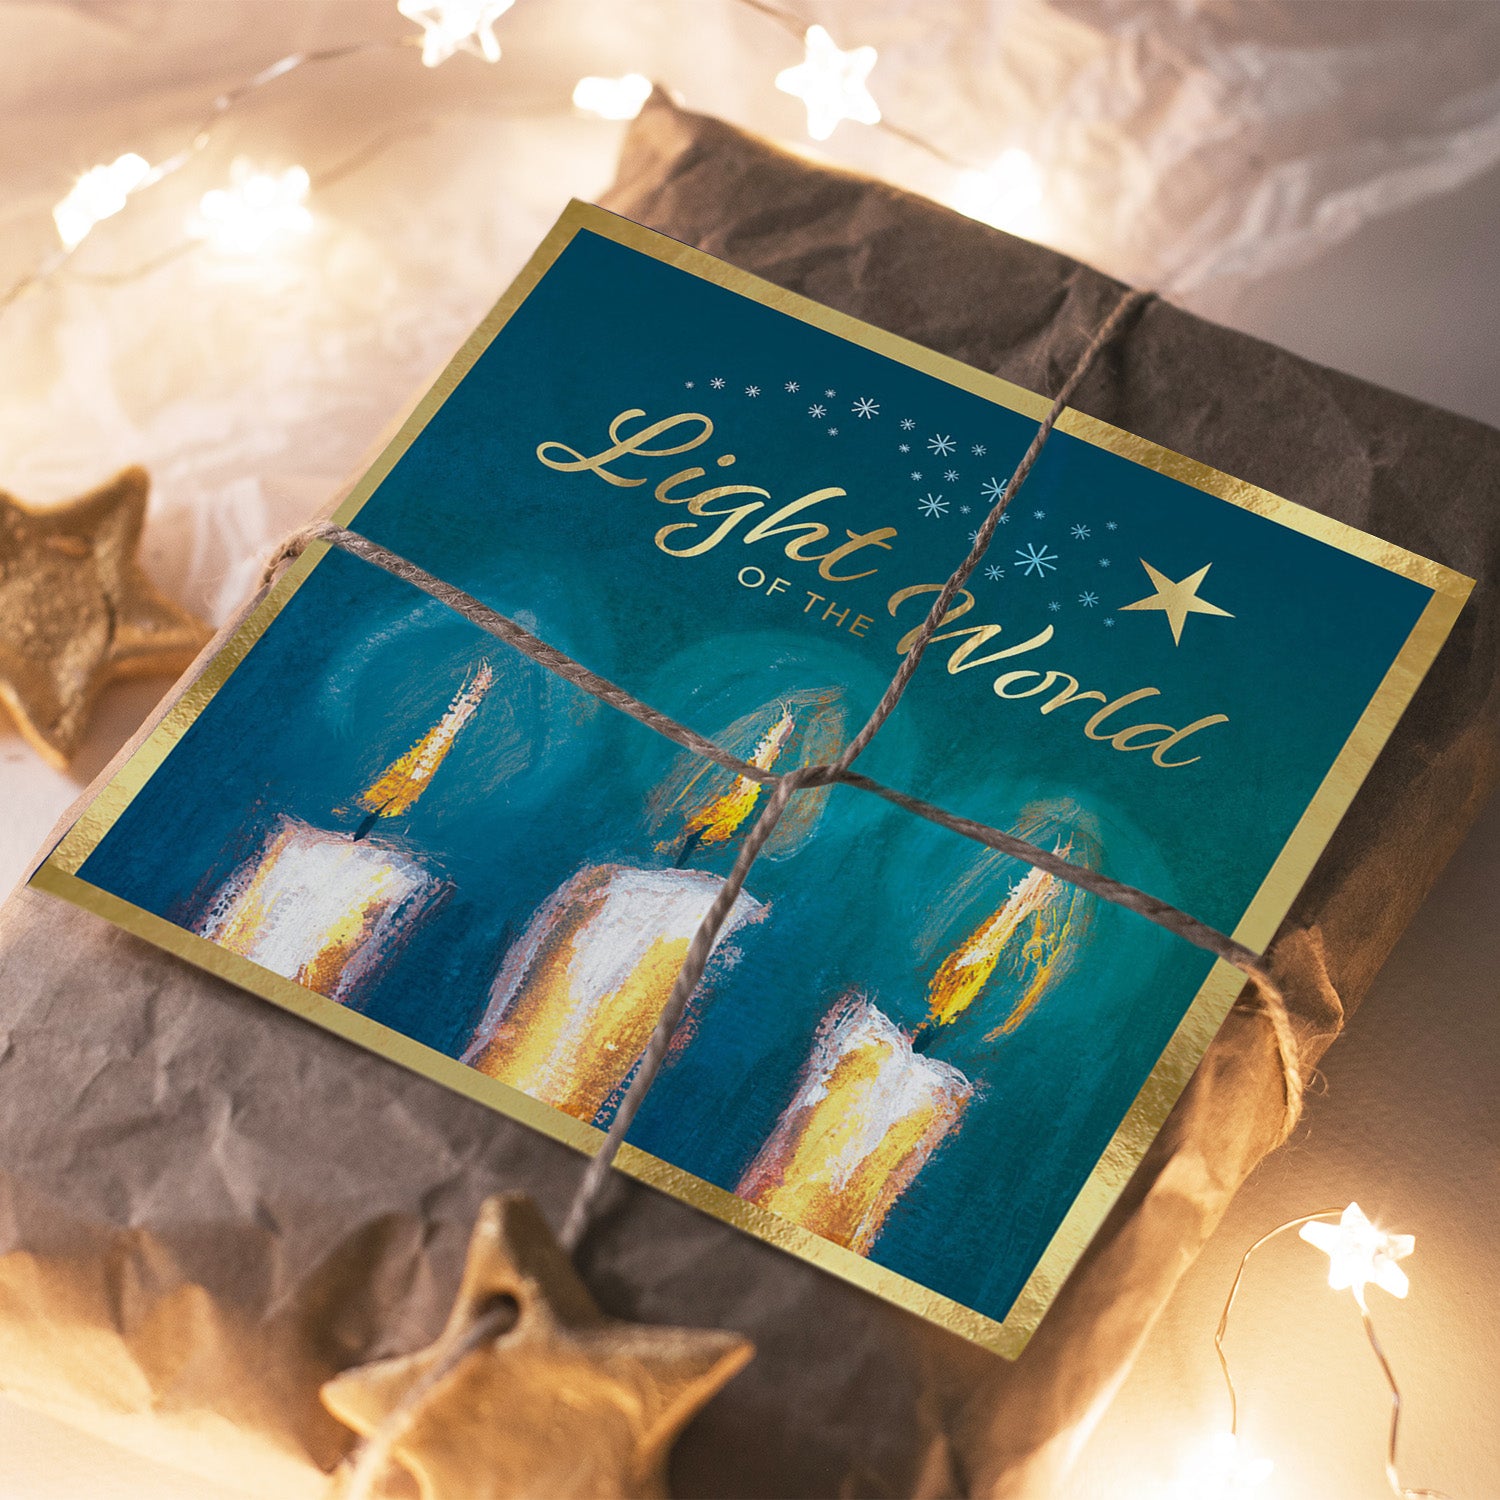 Compassion Christmas Card: Light Of The World (pack of 10) - The Christian Gift Company